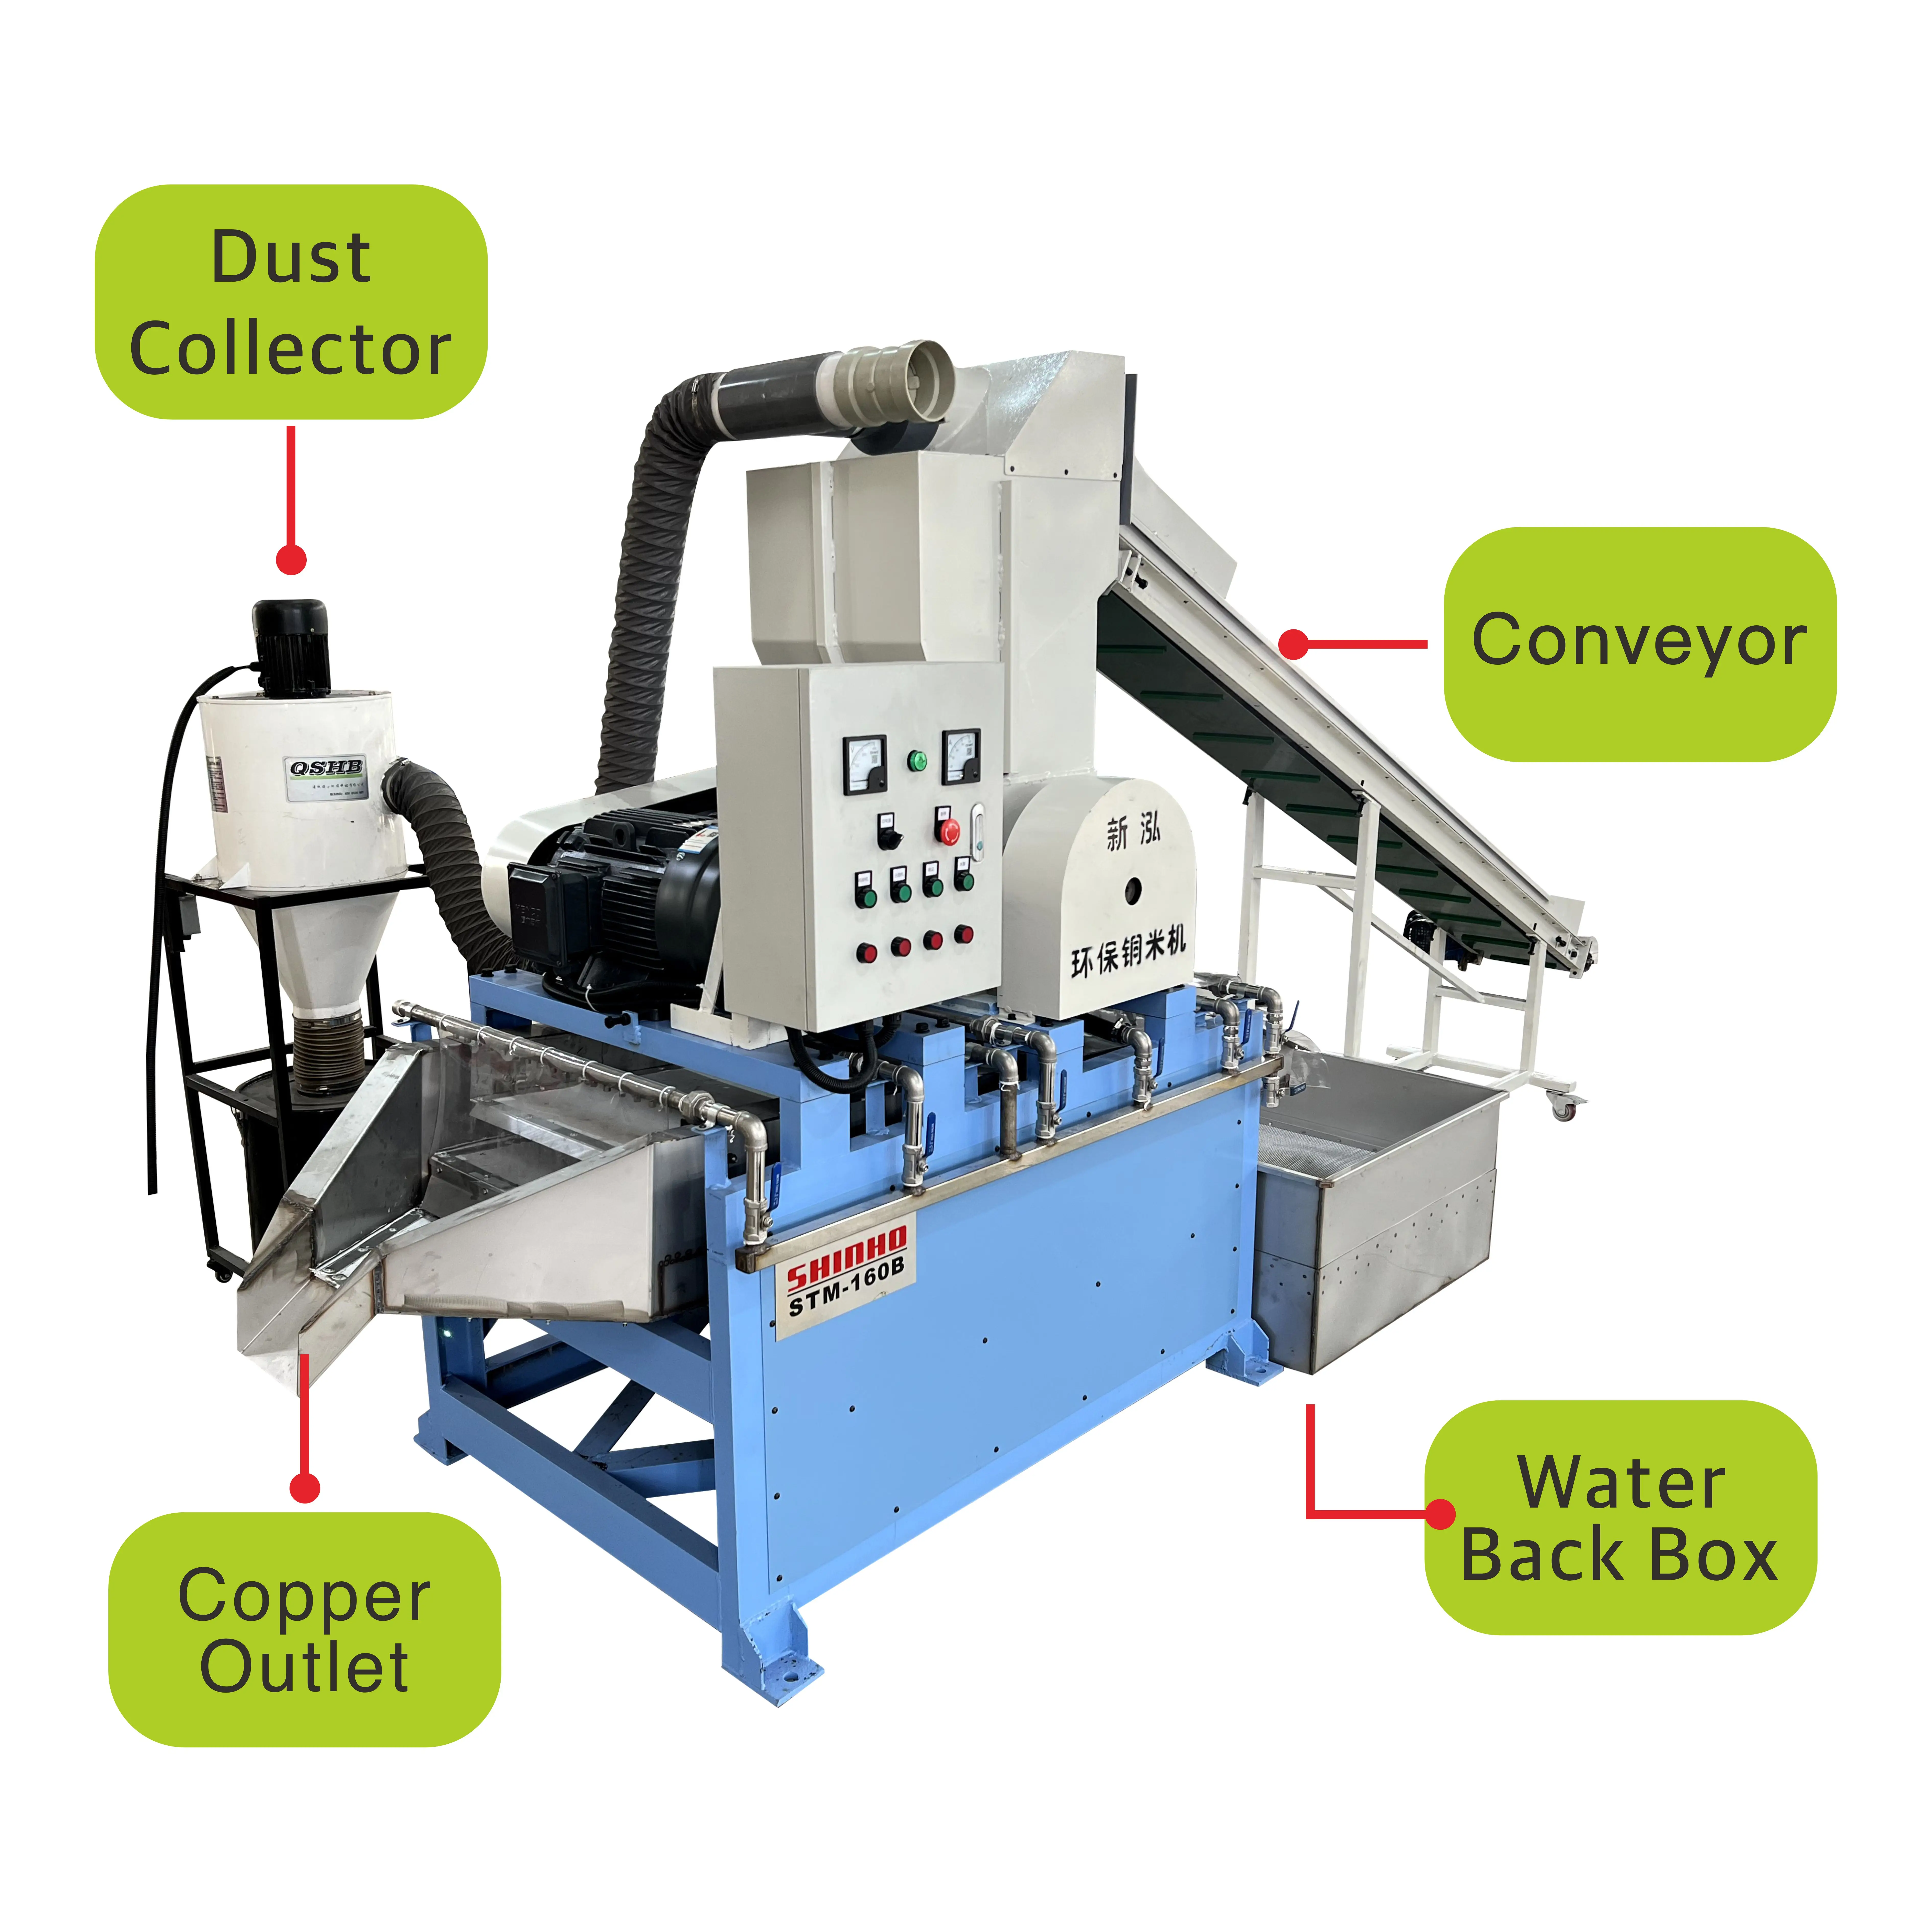 Shinho Automatic Car Popular Pure Granule Recycle Peeling Stripper Used Crushing Cable Granulator Copper Wire Recycling Machine